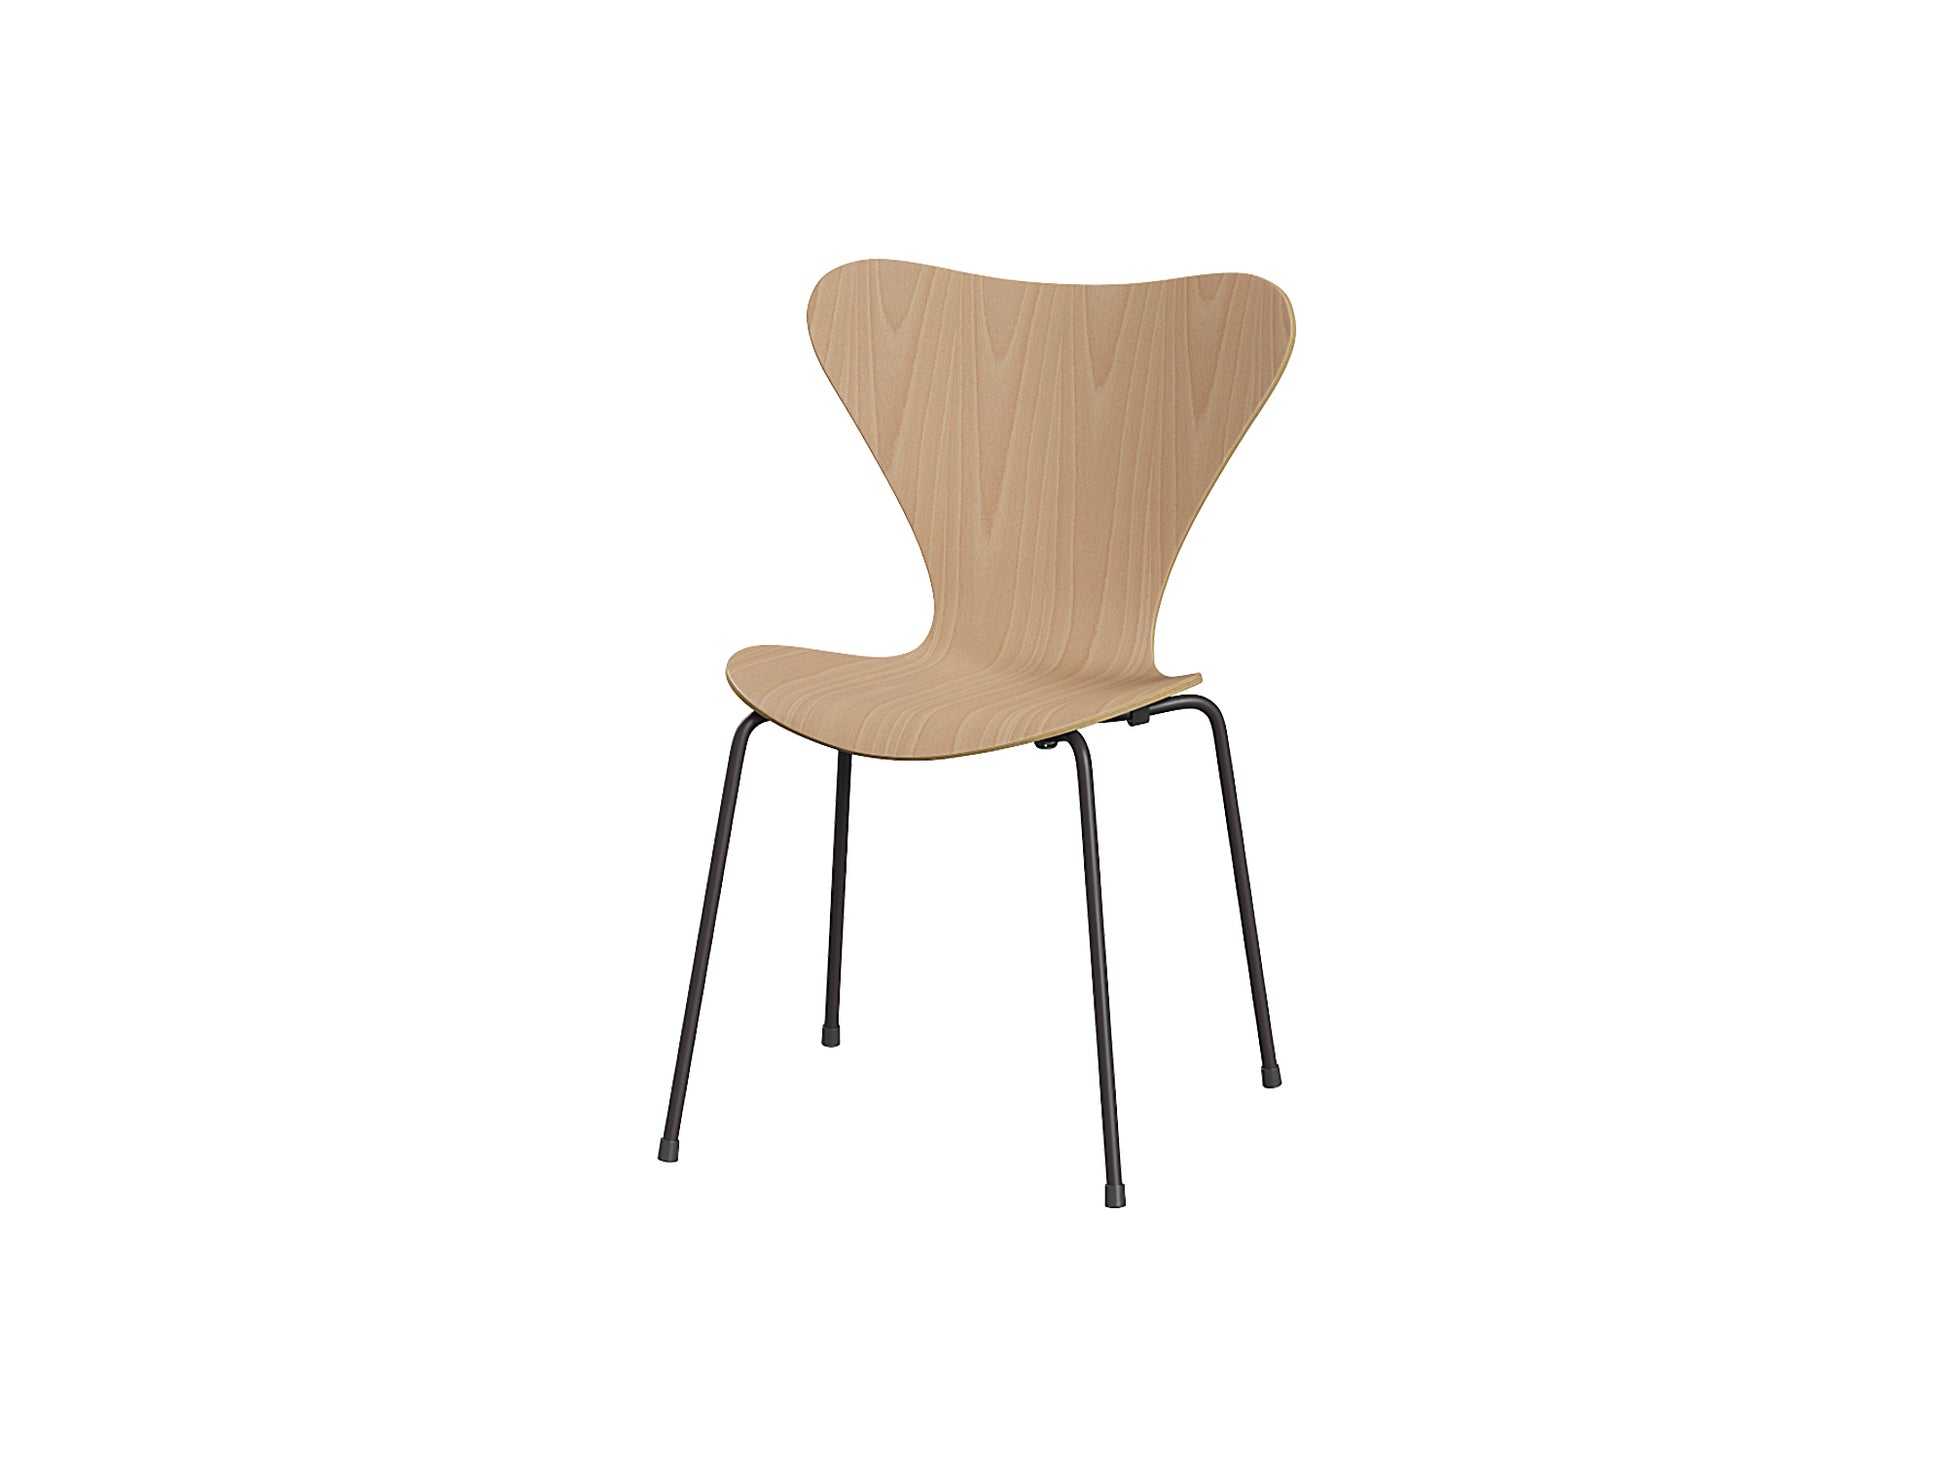 Series 7 Dining Chair (Clear Lacquered Wood) by Fritz Hanse - Beech / Warm Graphite Steel